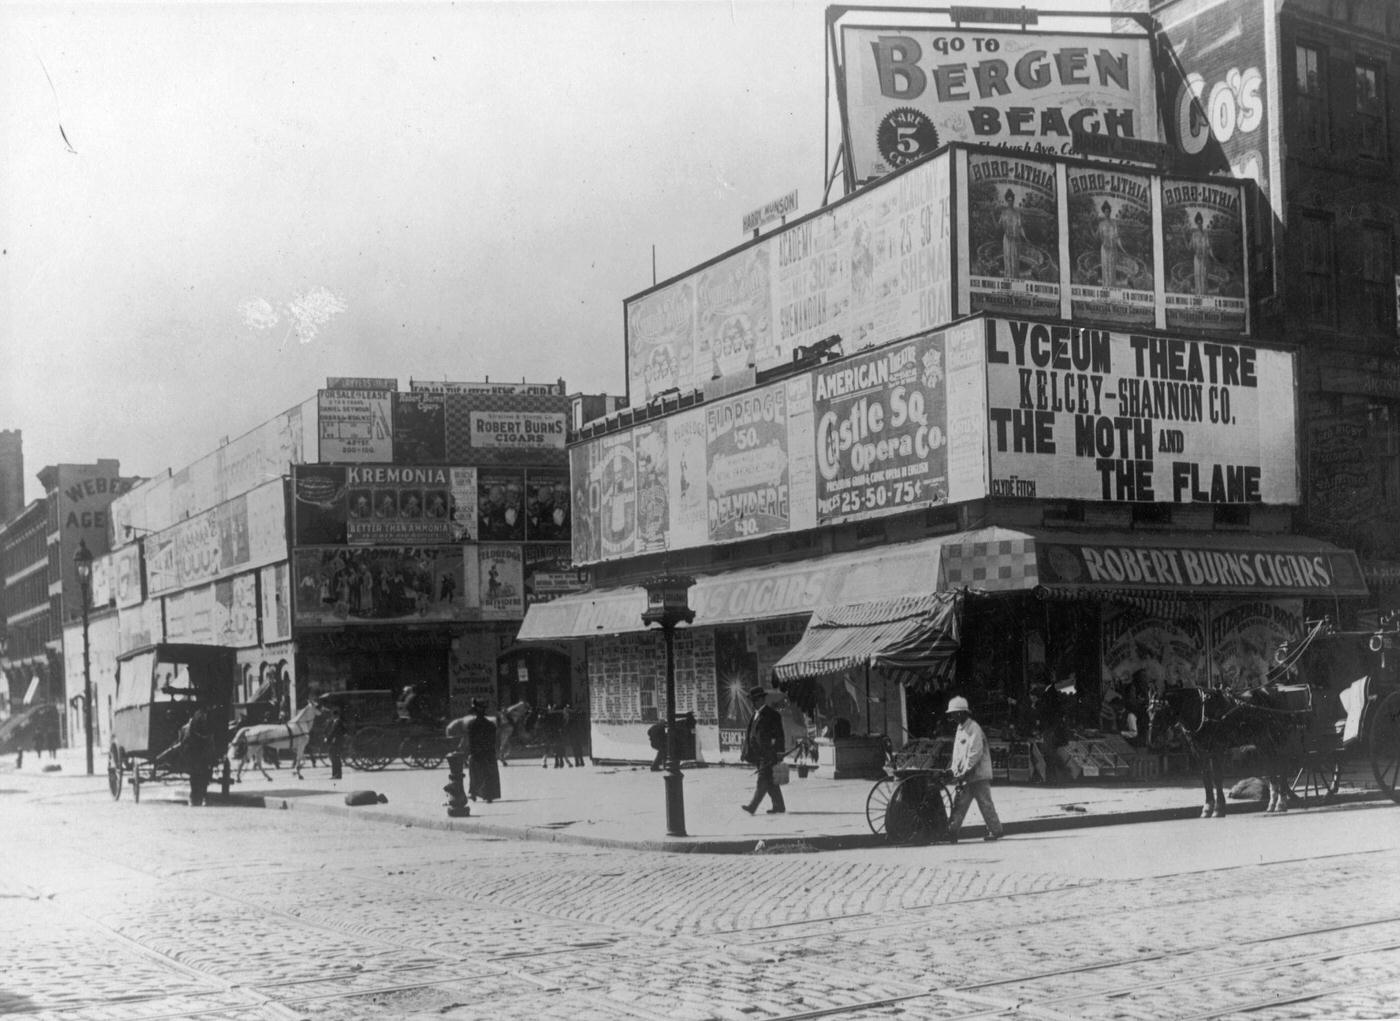 Intersection Of Broadway And 42Nd Streets With Billboards, Theatre Performances, Pedestrians, Horse-Drawn Carriage, Cobblestone Roads, Circa 1900